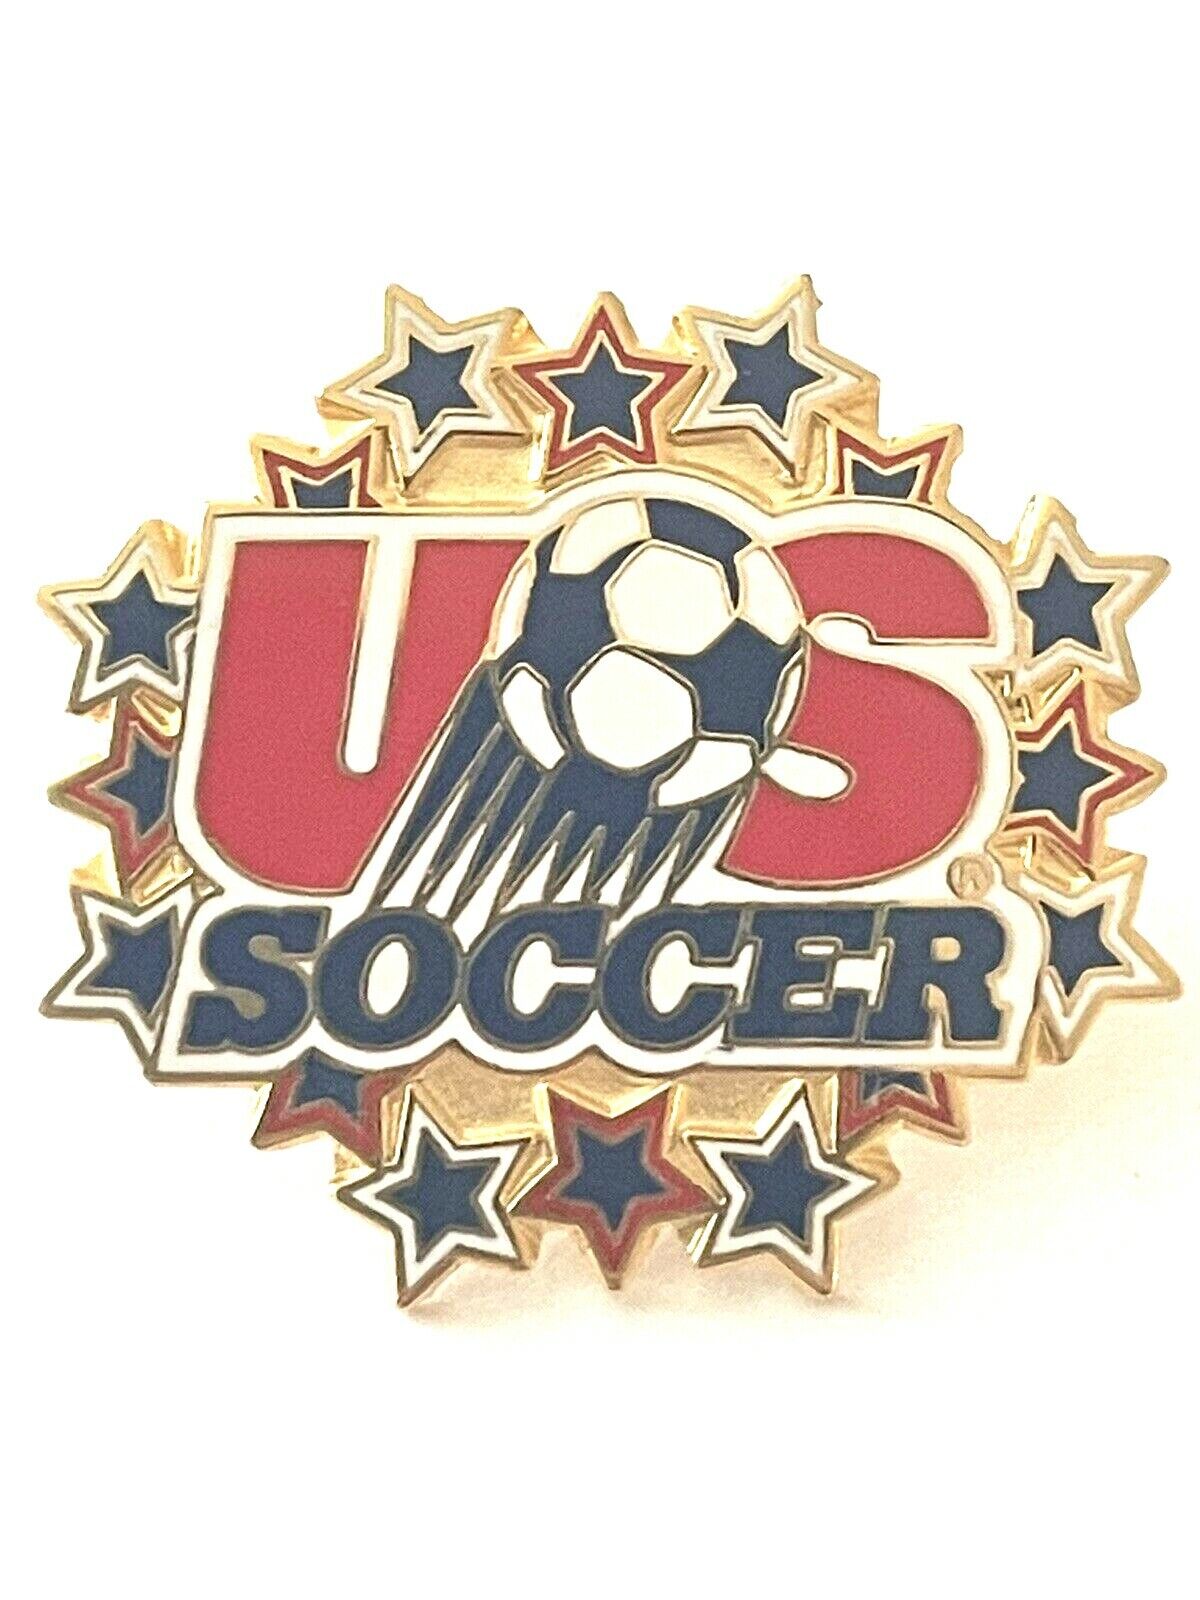 US Soccer Strike Zone Stars Vintage Collectible Lapel Pin